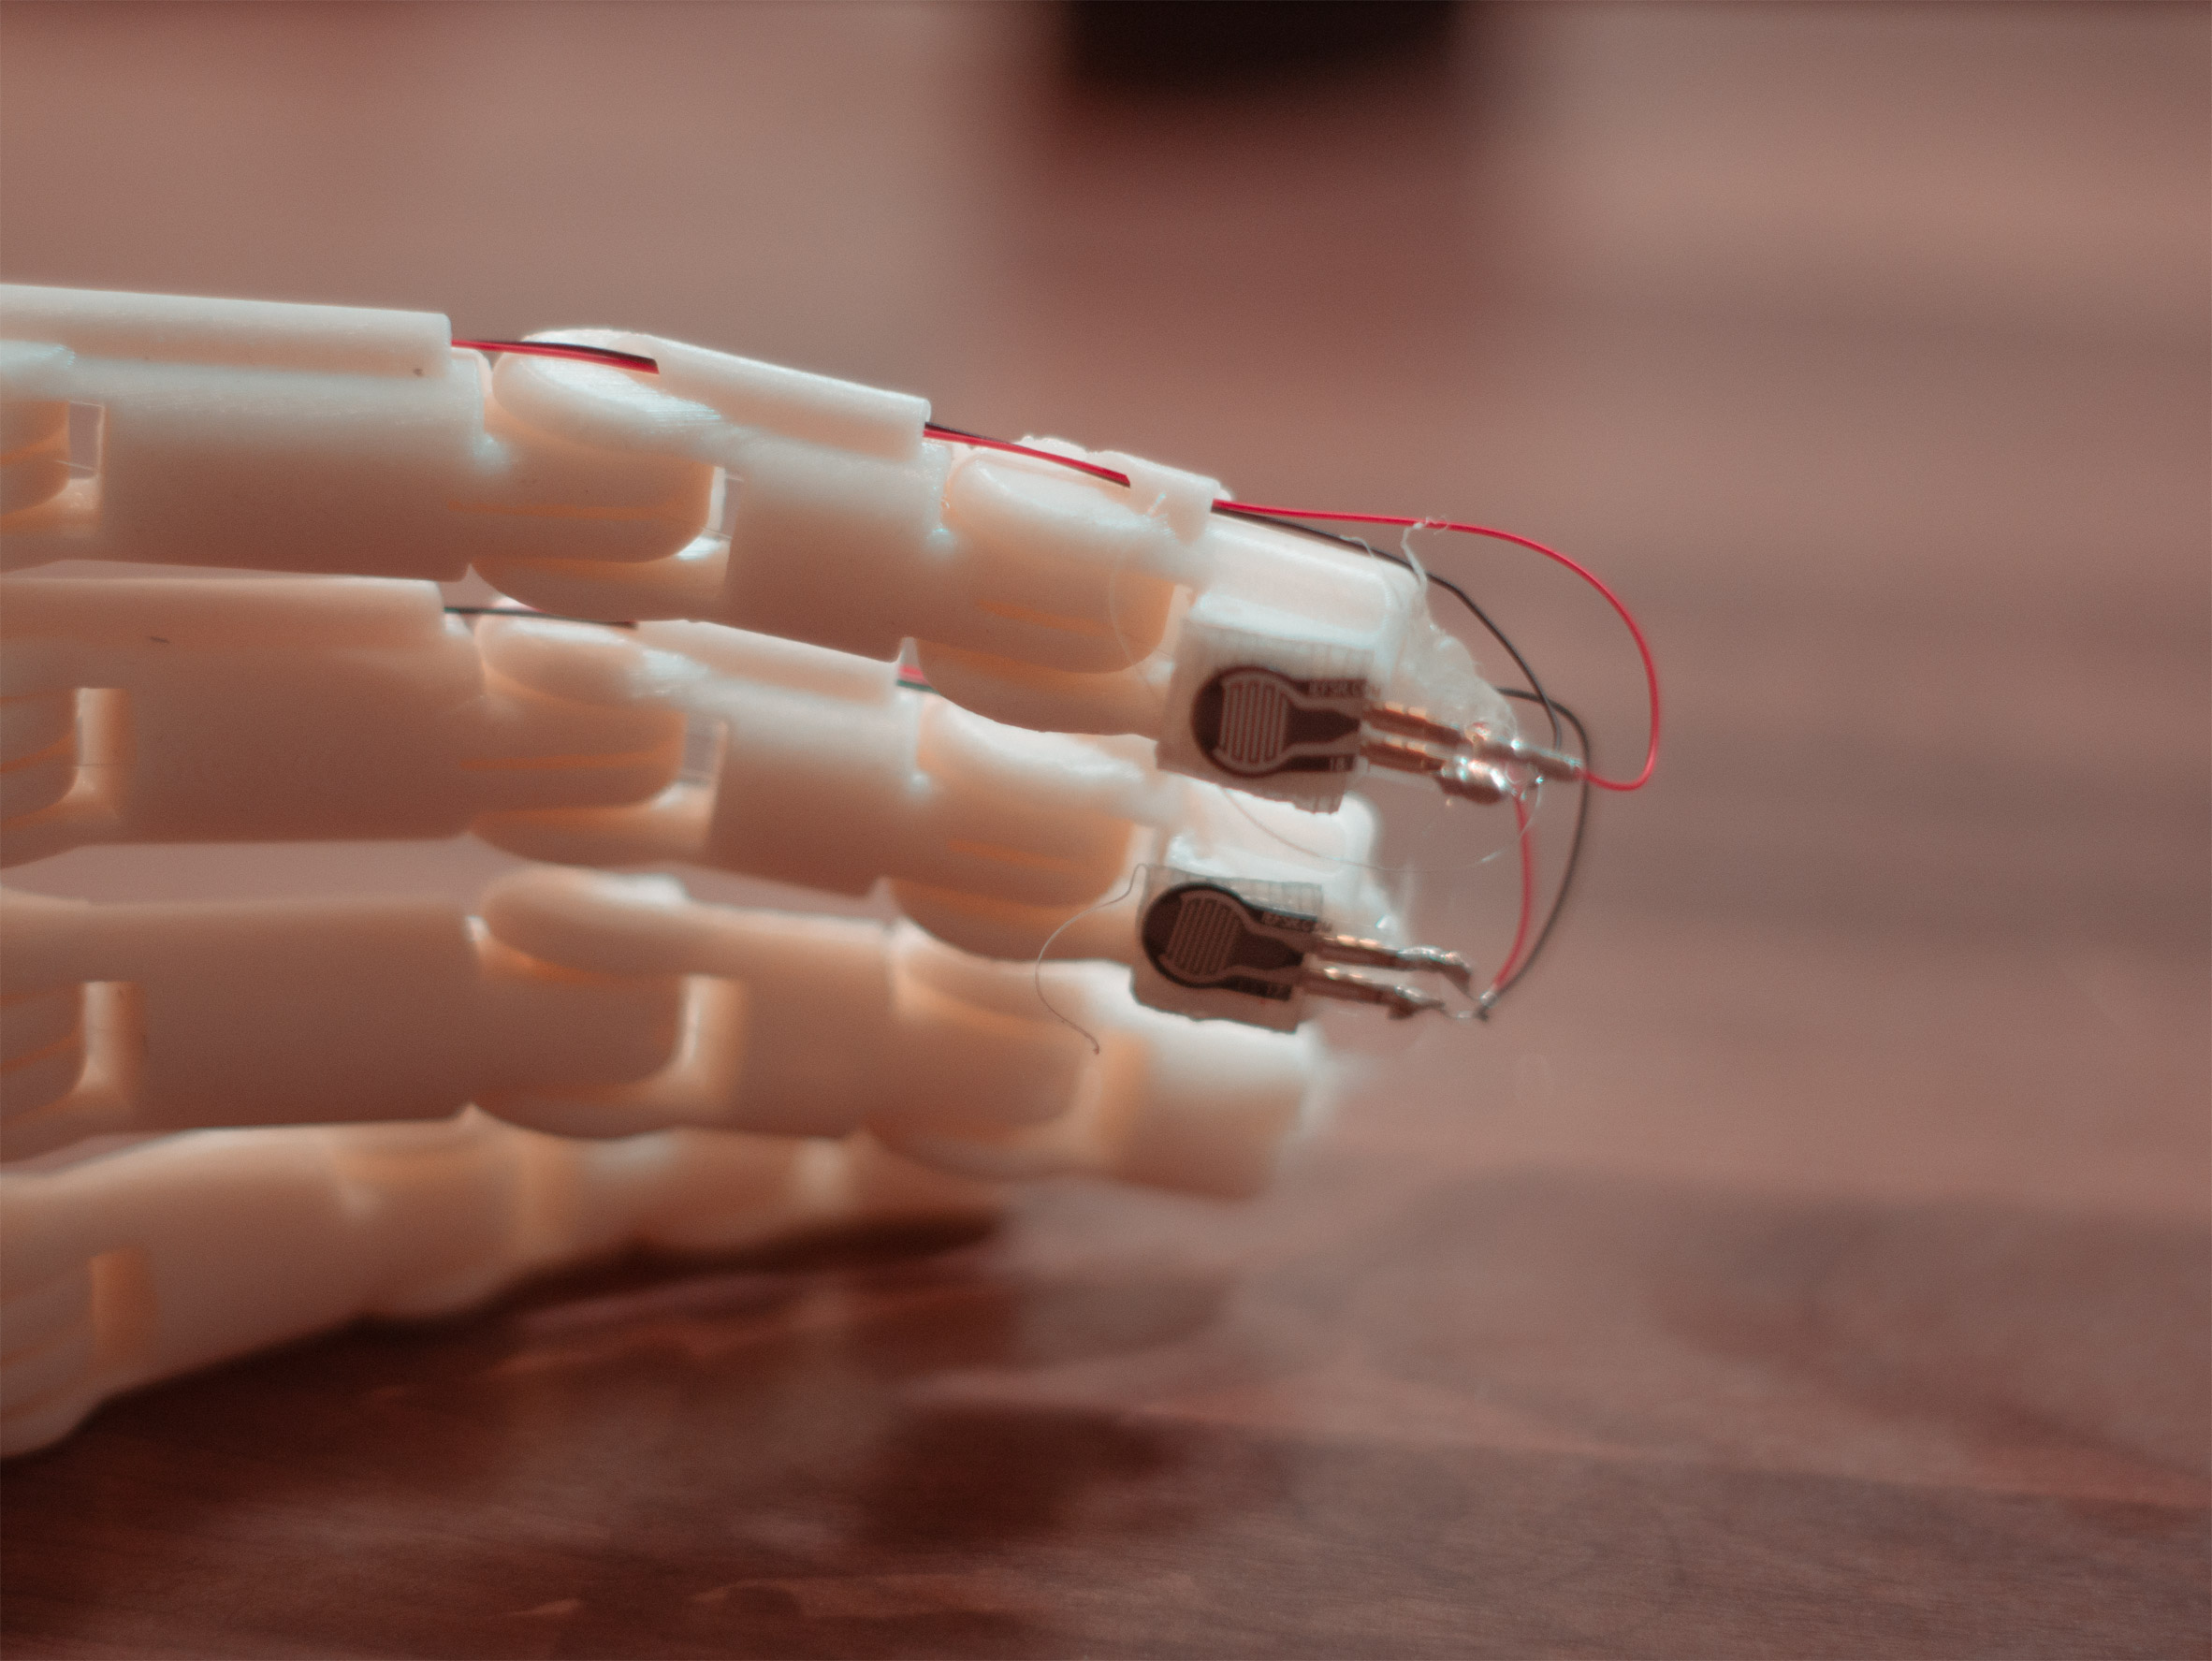 Lorenzo Spreafico's 3D-printed prosthetic gives tactile feedback at low cost